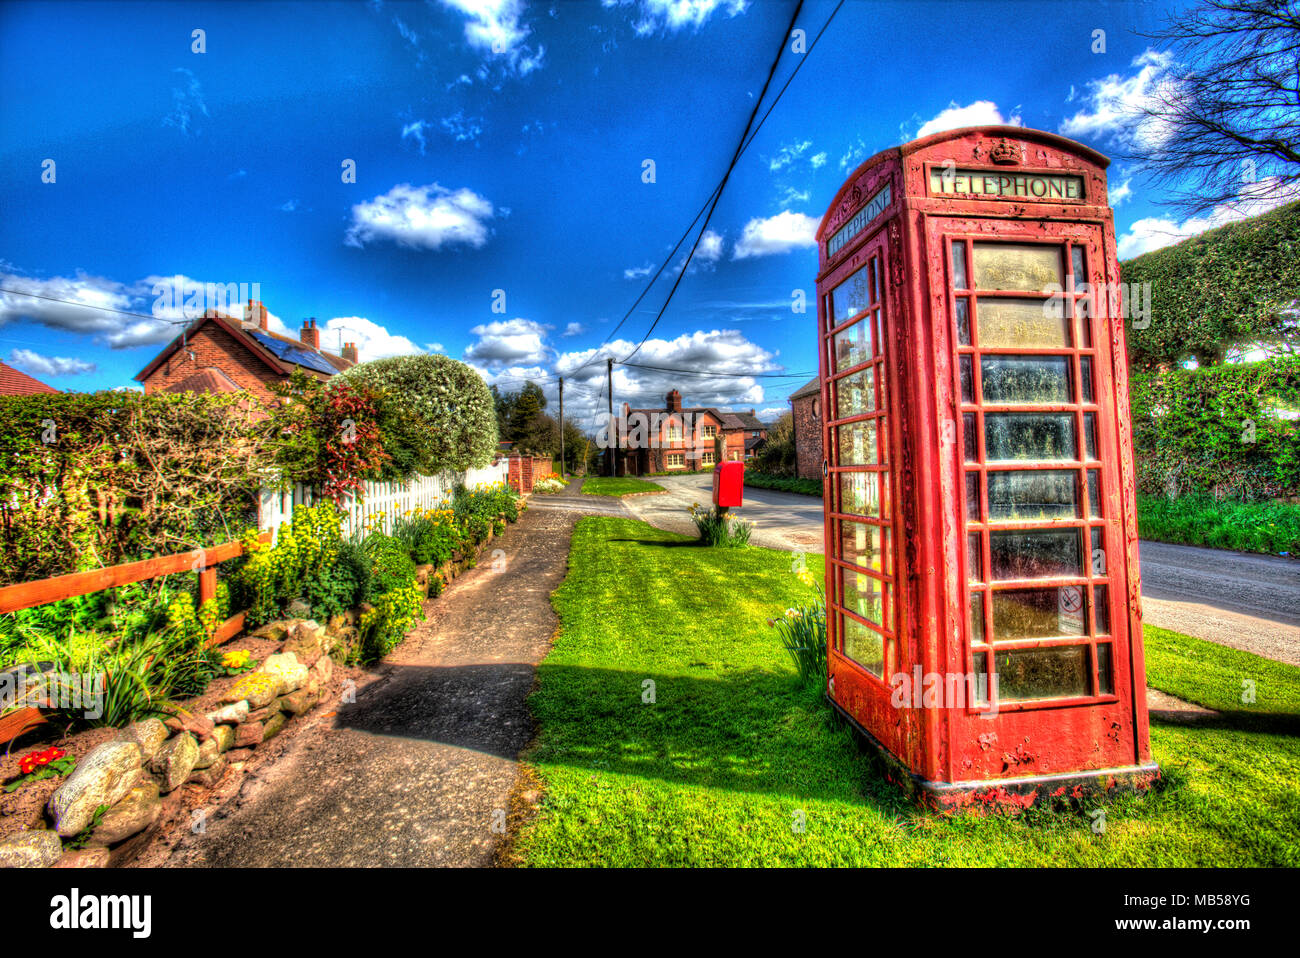 Village of Barton, England. Artistic view of the picturesque Cheshire village of Barton, with an unused K6 red telephone box in the foreground. Stock Photo